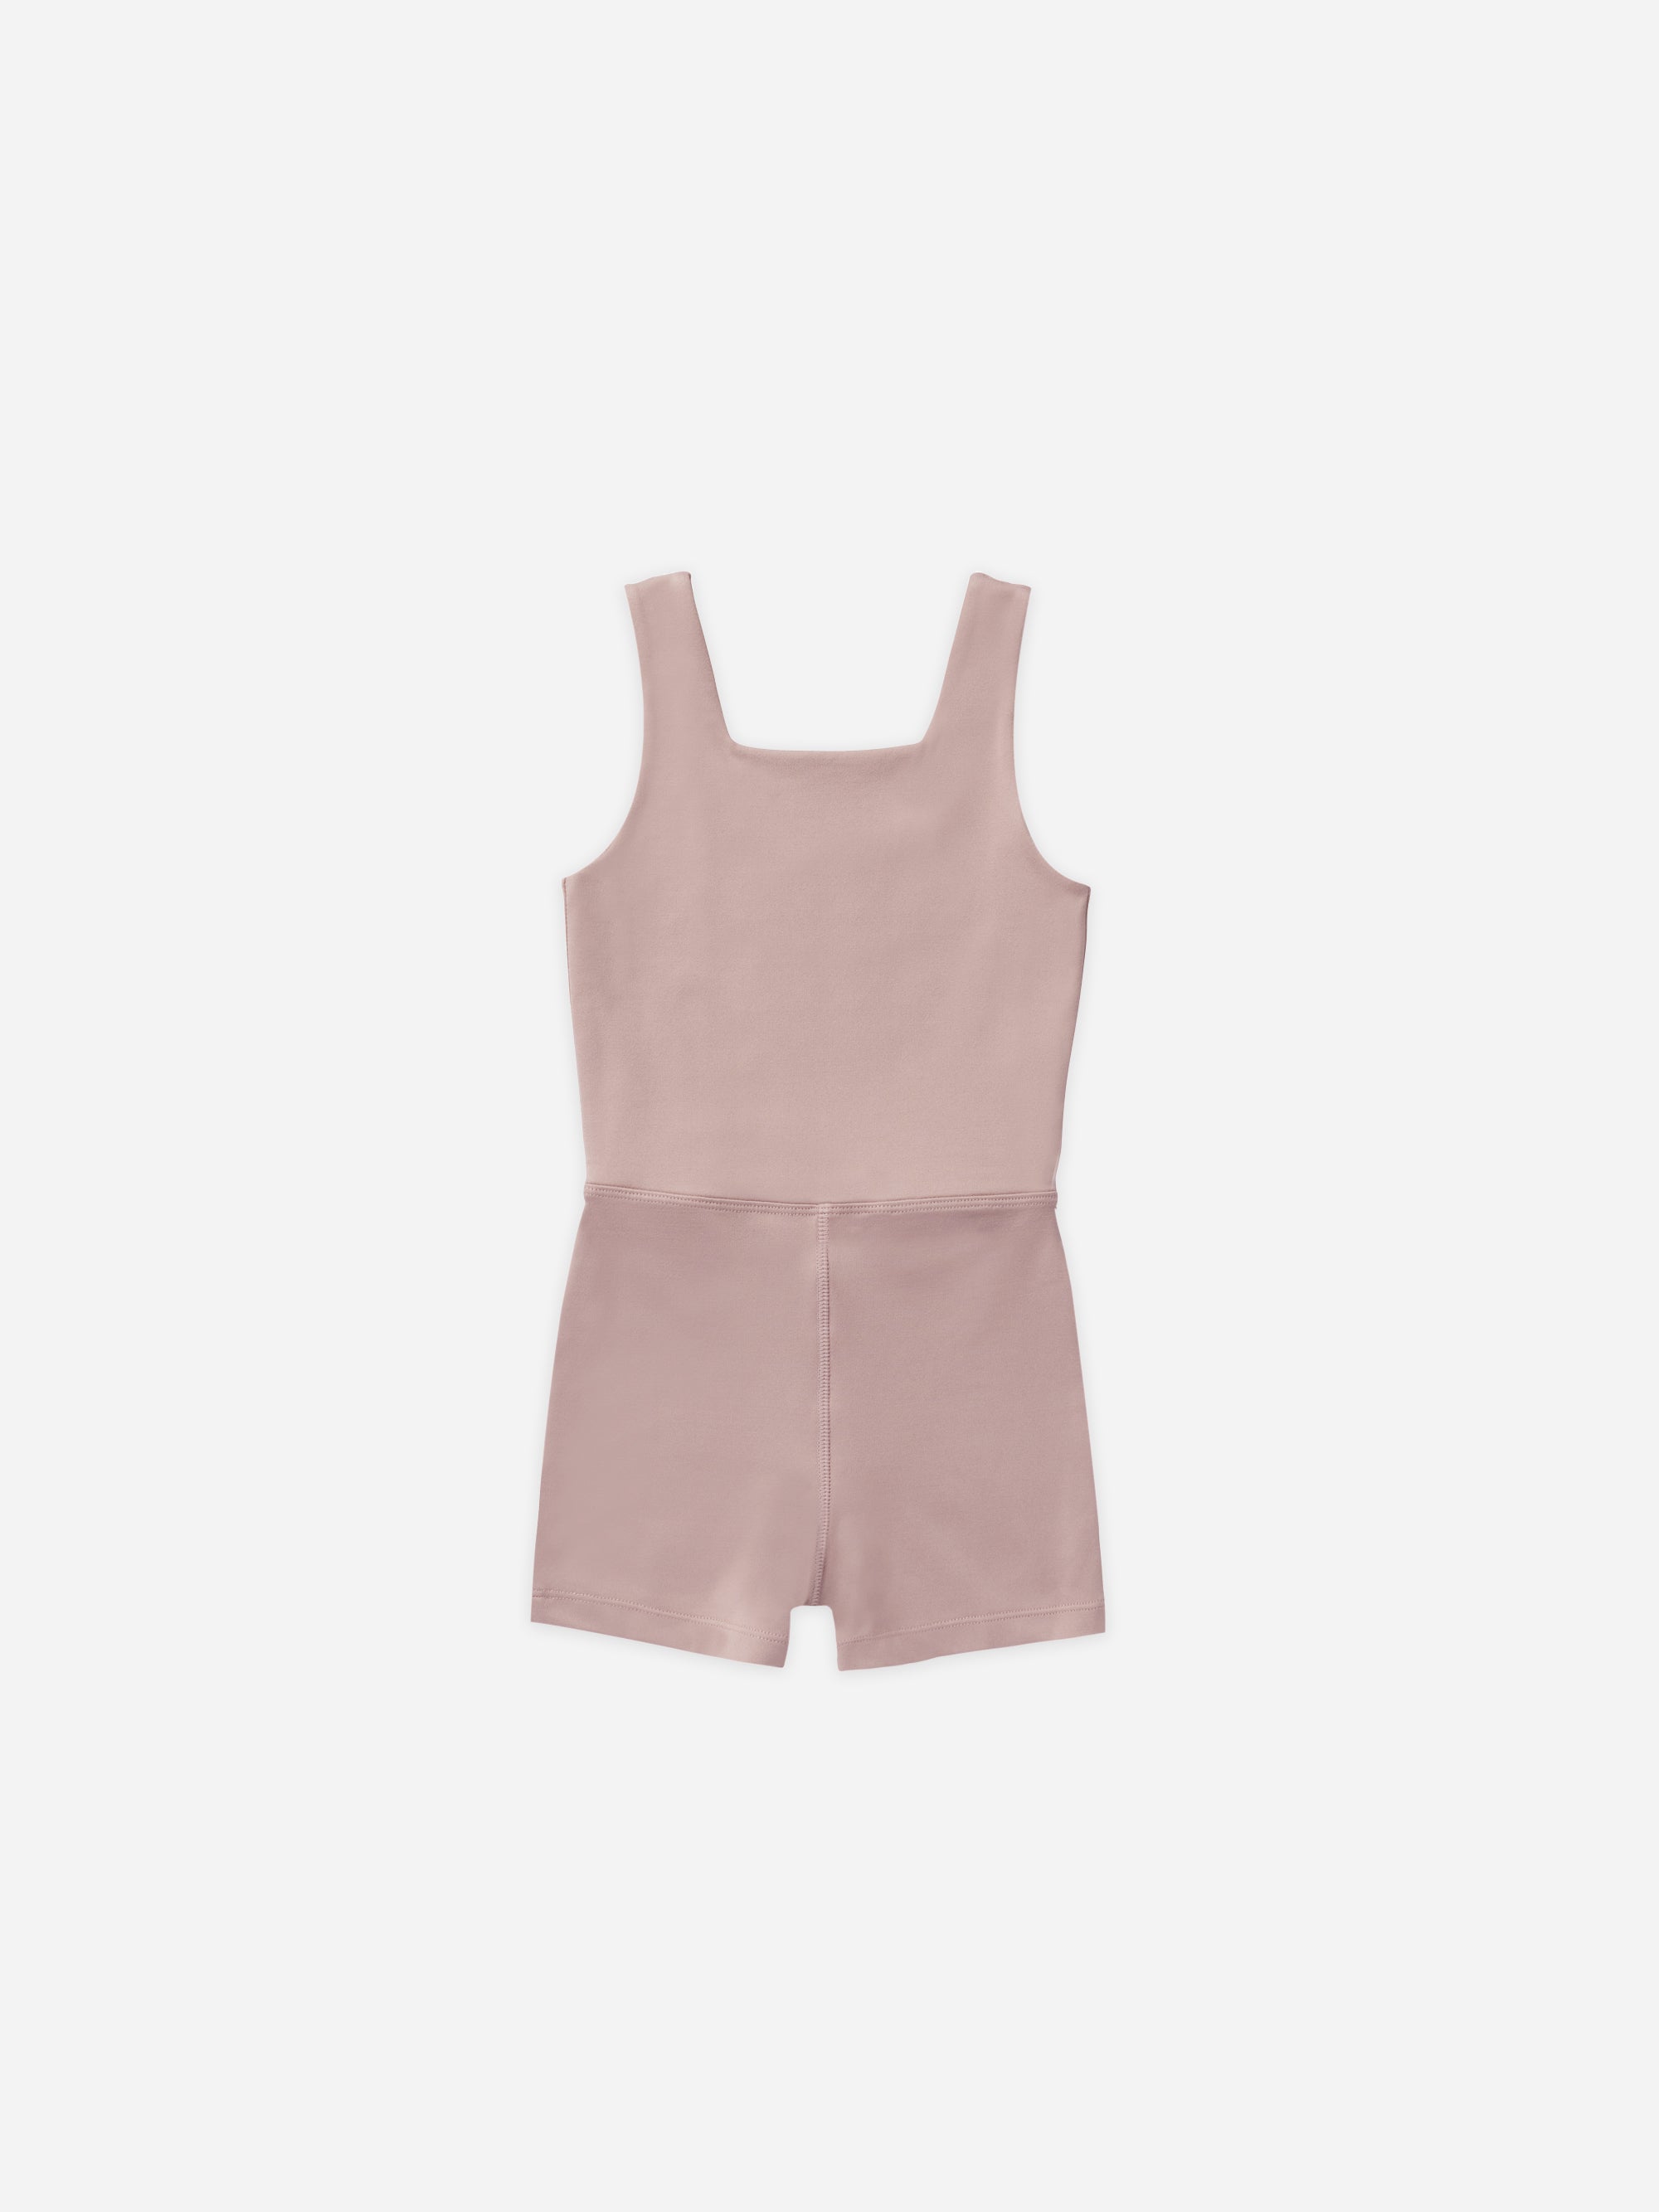 Malibu Bodysuit || Mauve - Rylee + Cru | Kids Clothes | Trendy Baby Clothes | Modern Infant Outfits |